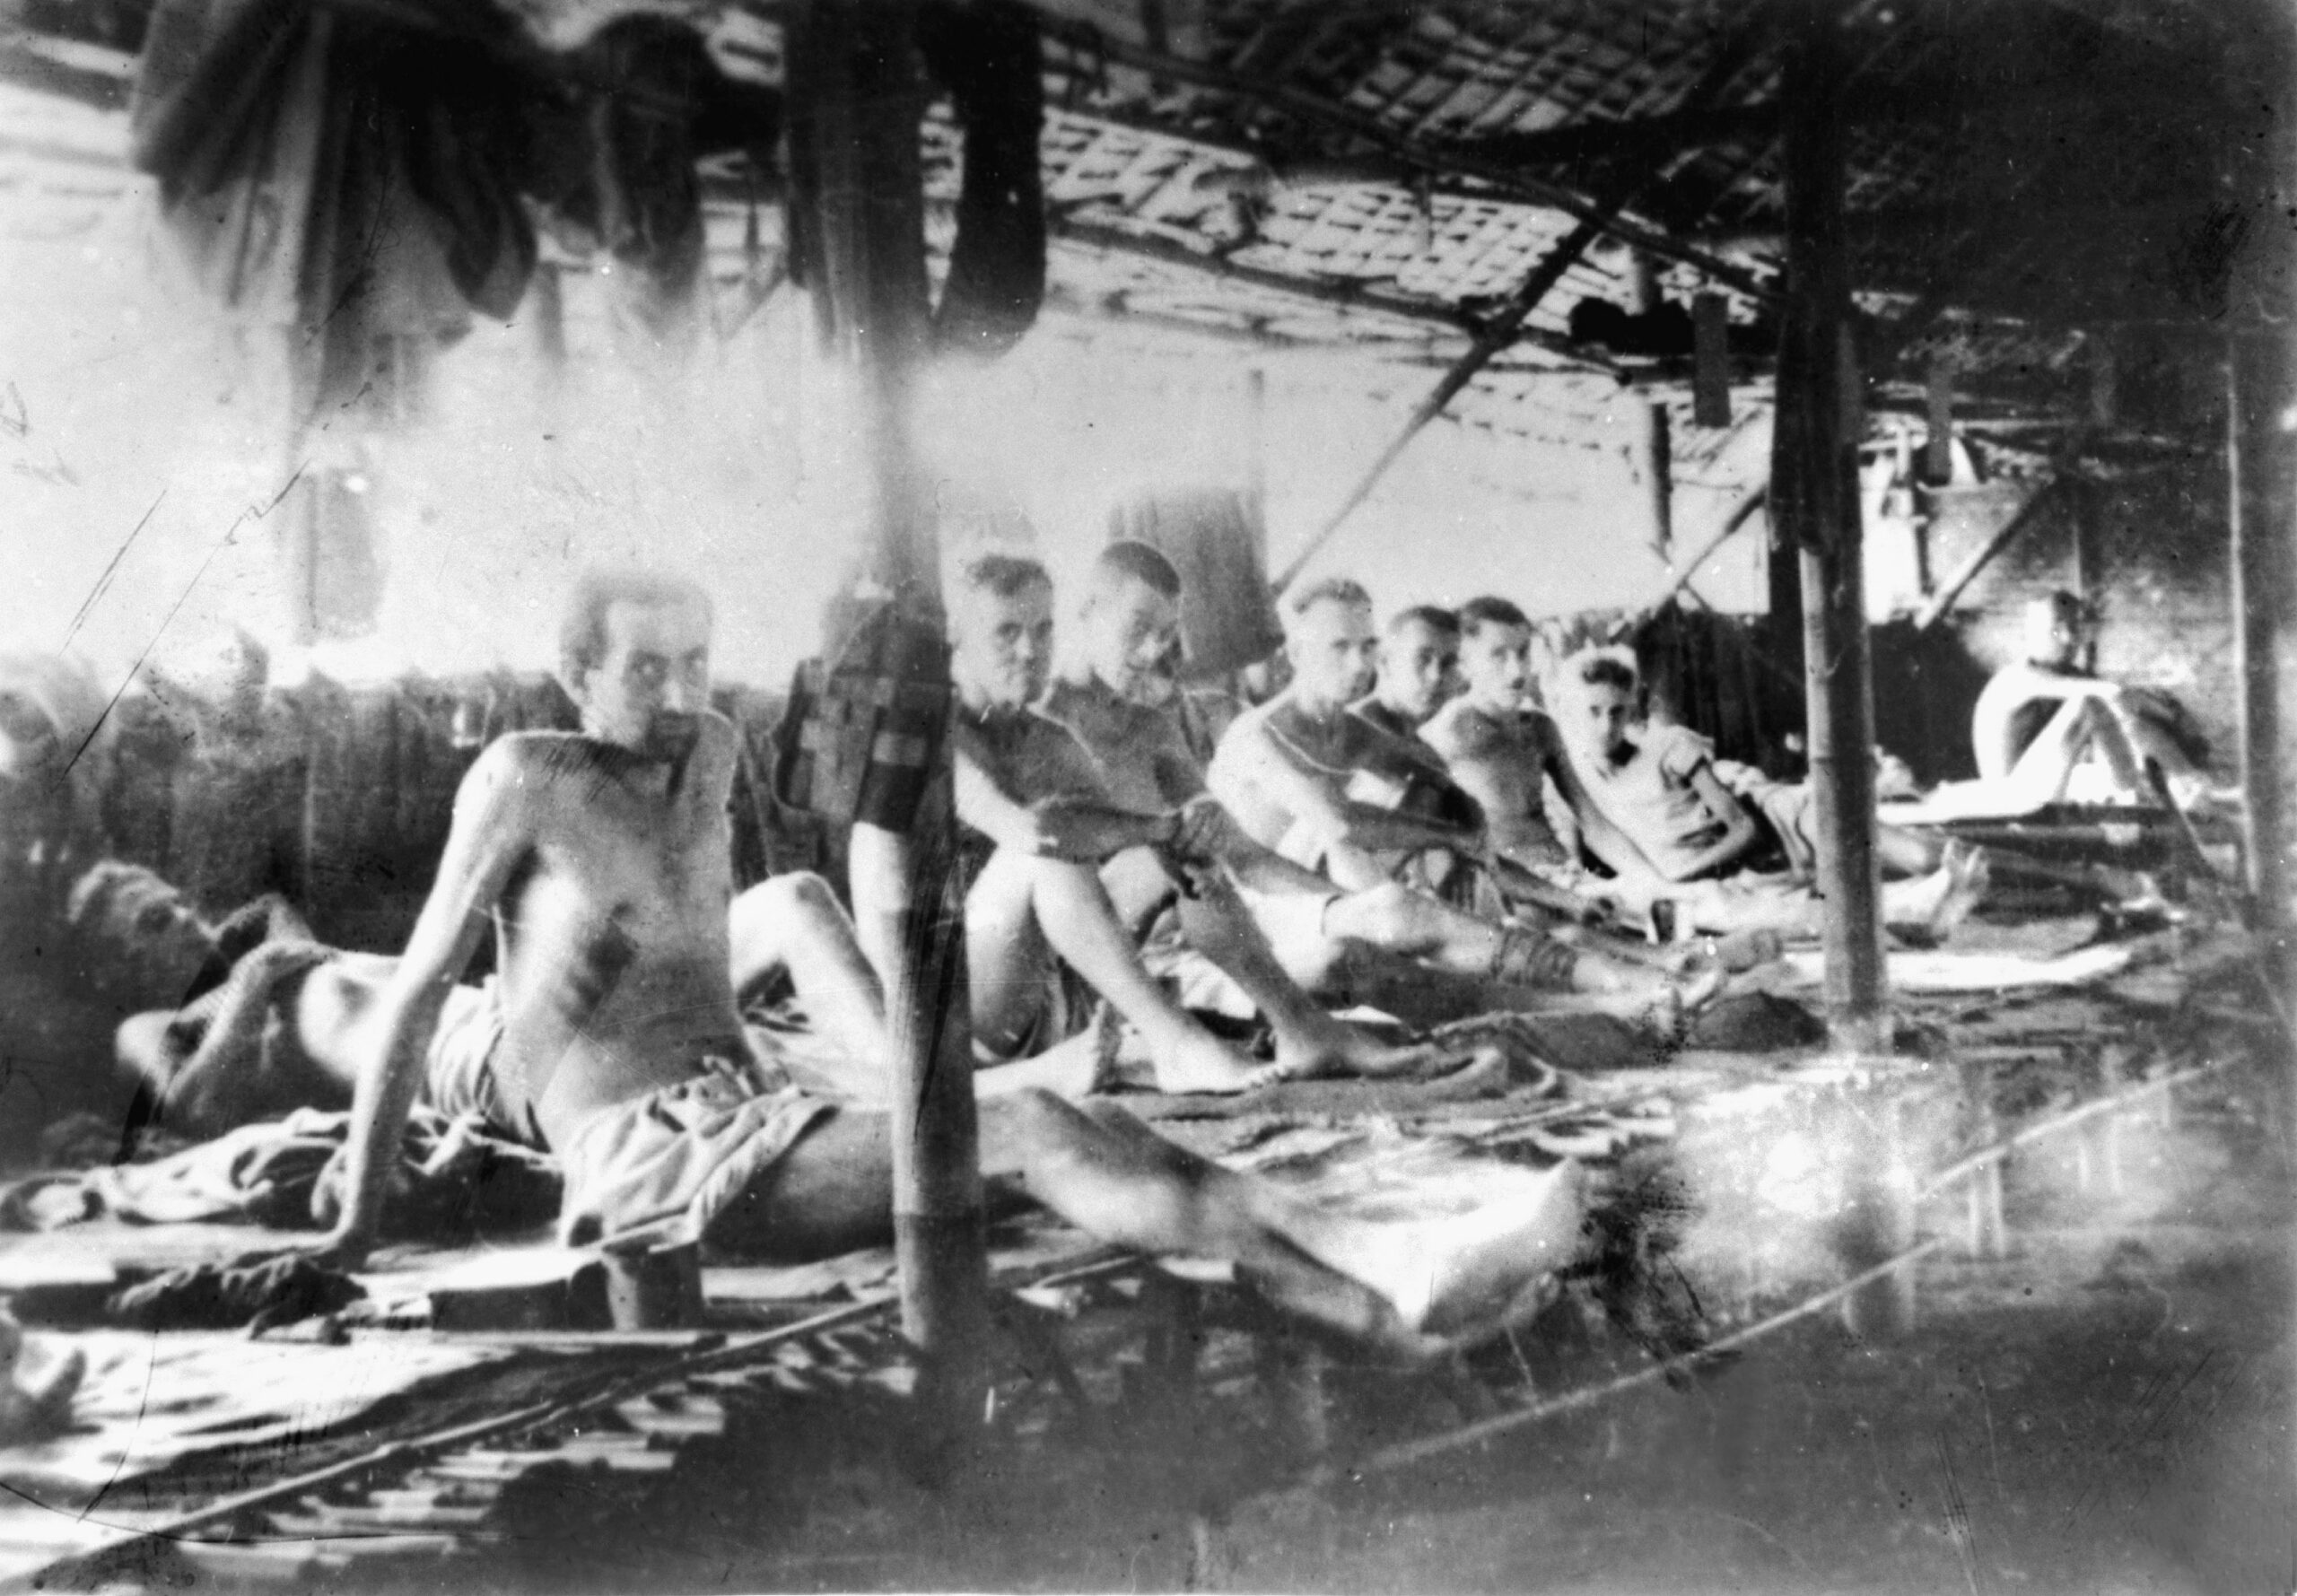 Emaciated Allied prisoners stare blankly at the photographer who snapped this photo of them lying on sleeping platforms in a large POW camp hut.